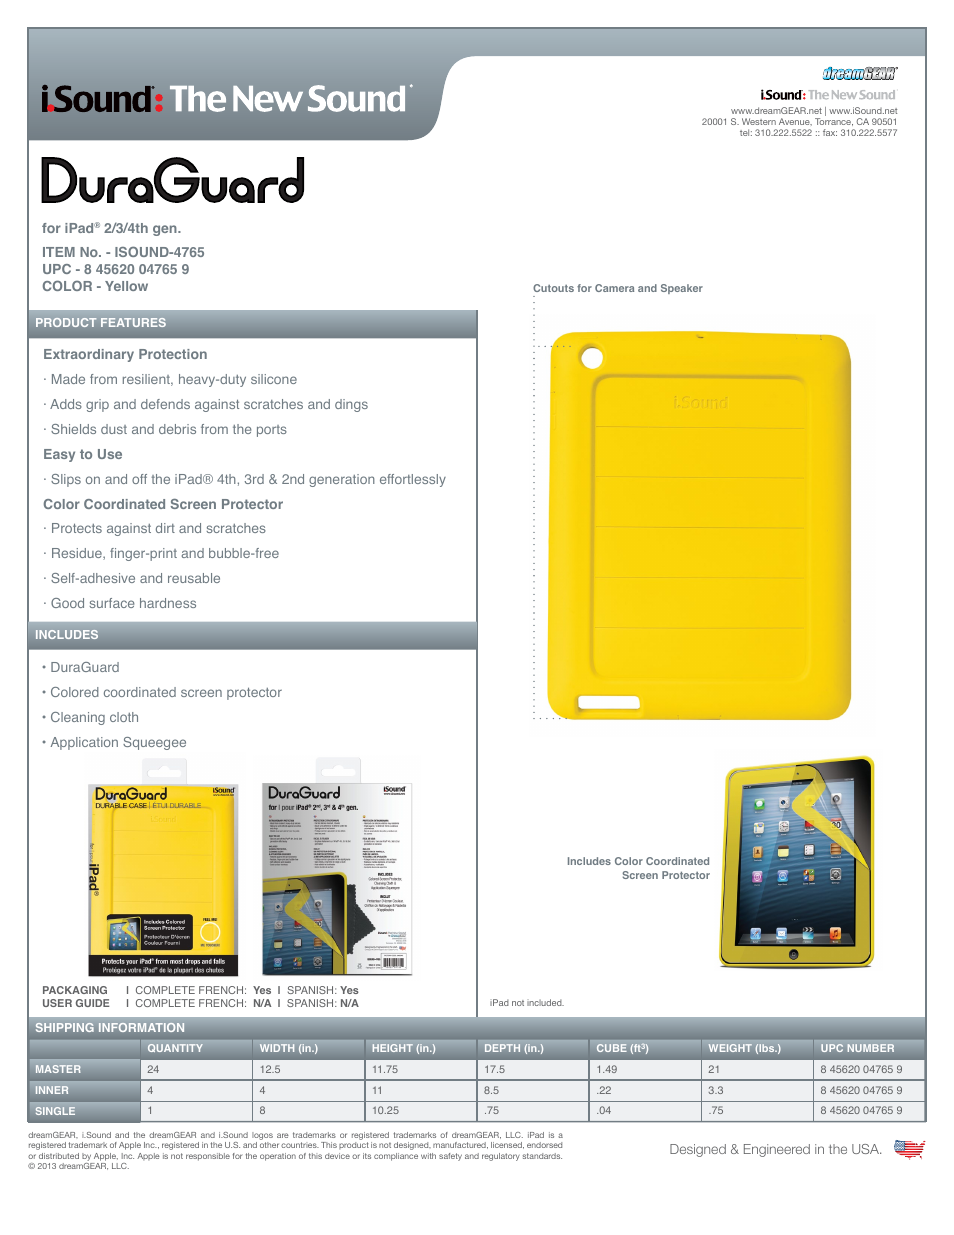 DuraGuard for iPad 4th-3rd-2nd generation - Sell Sheet